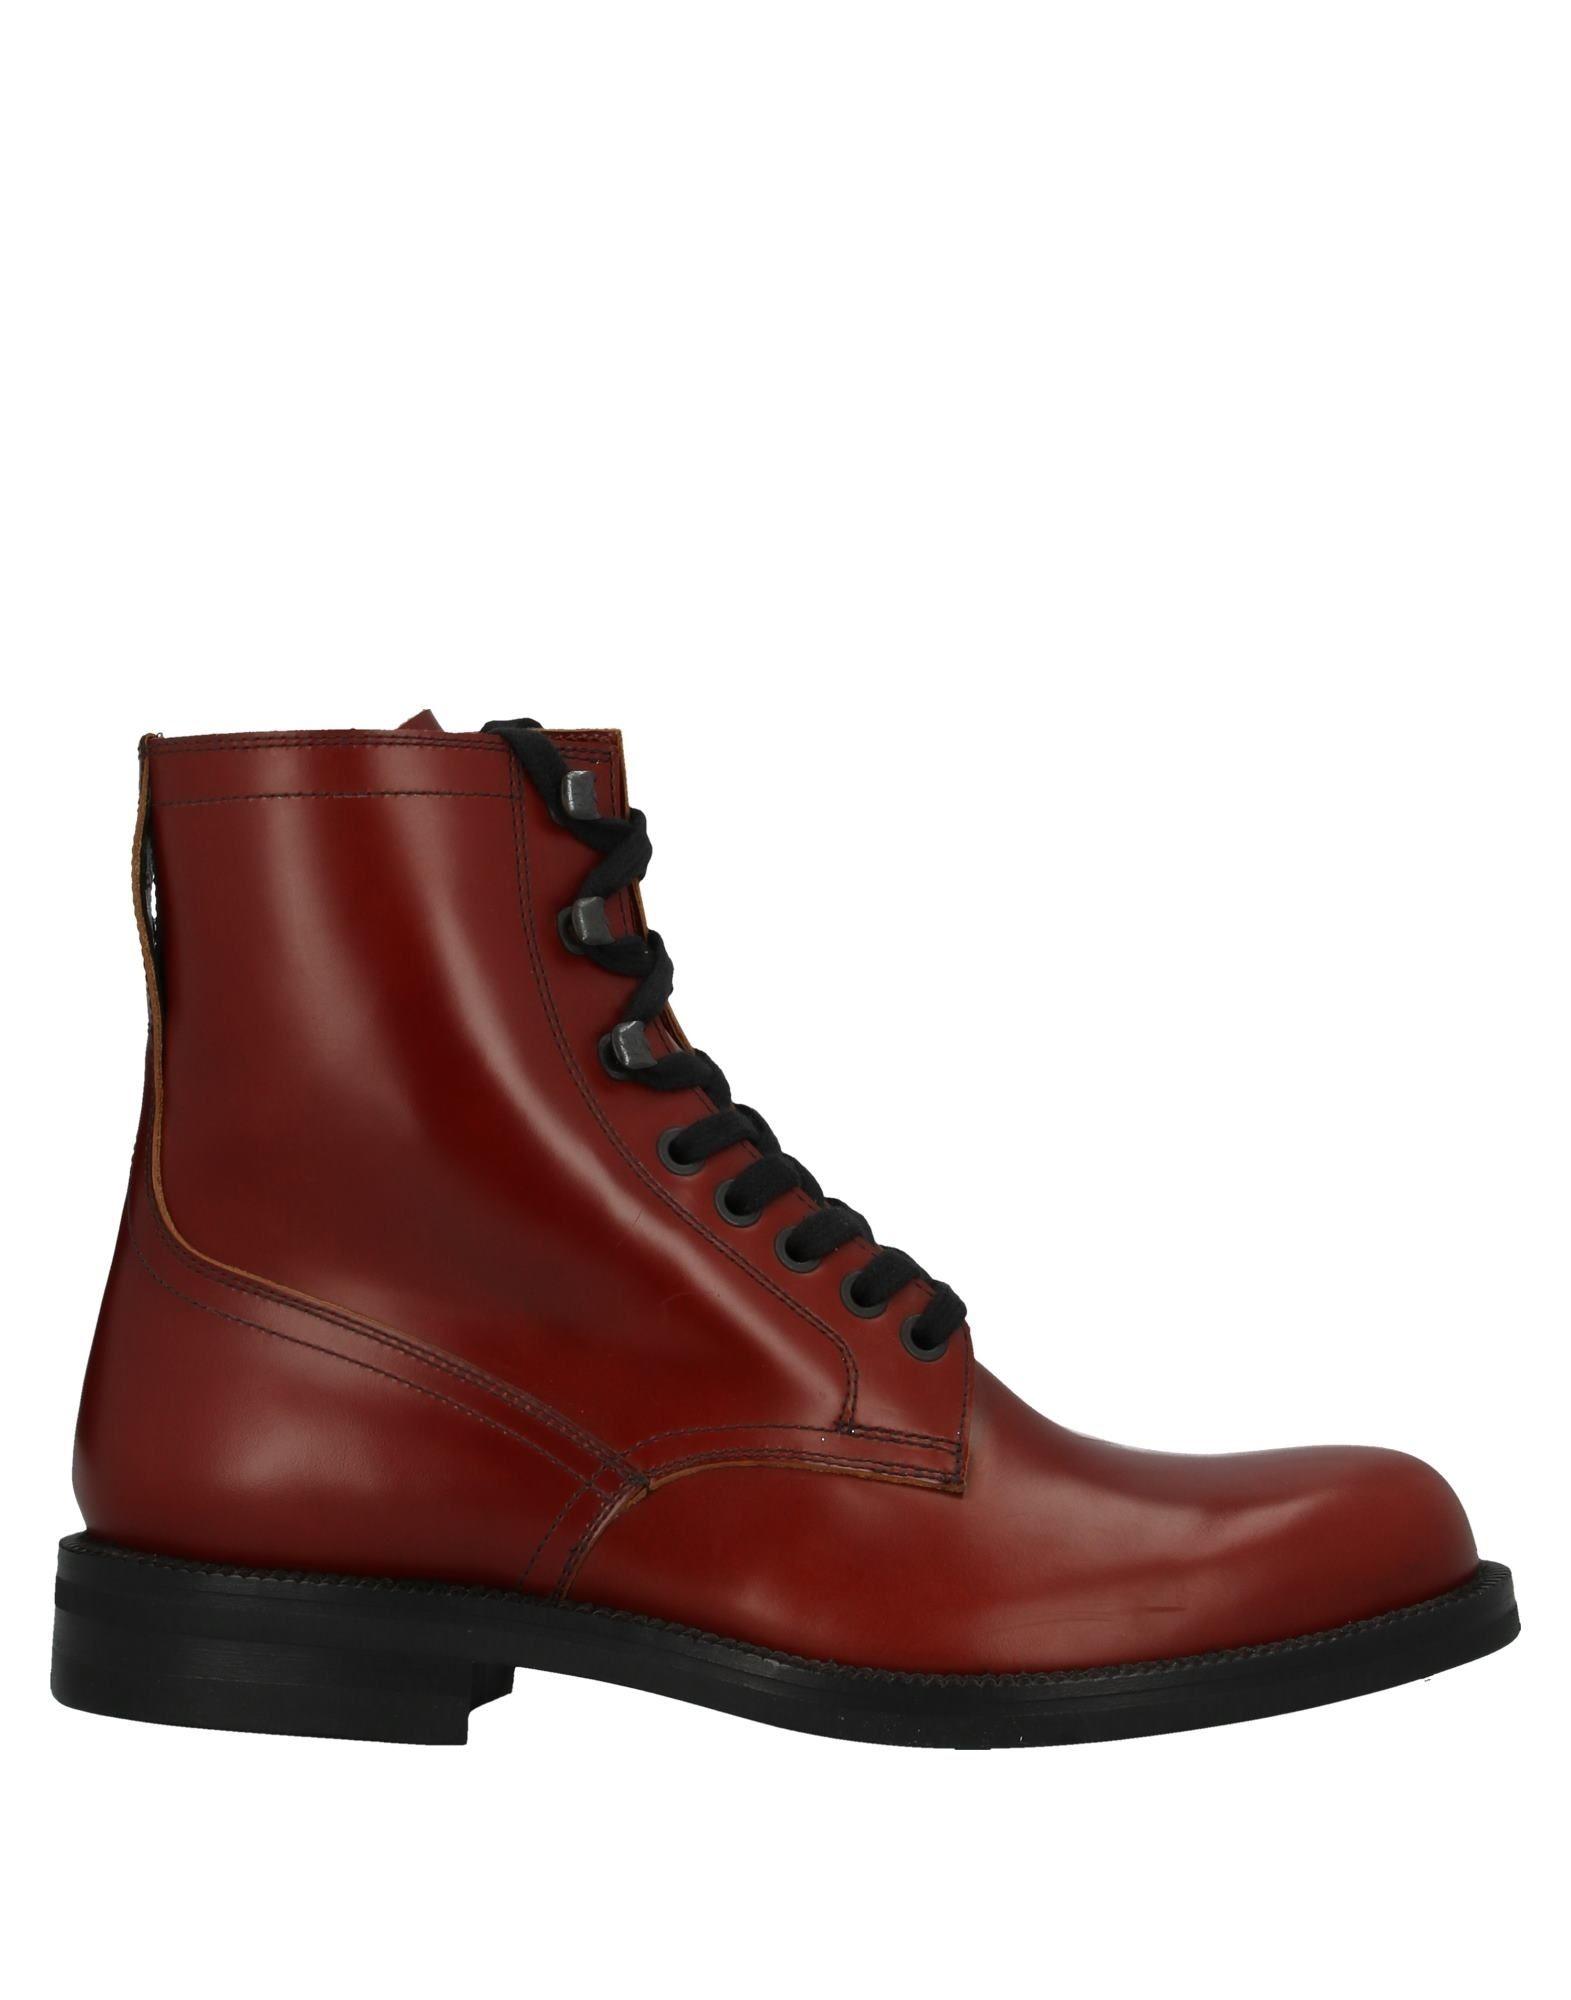 Dries Van Noten Leather Ankle Boots in Brick Red (Red) for Men - Lyst